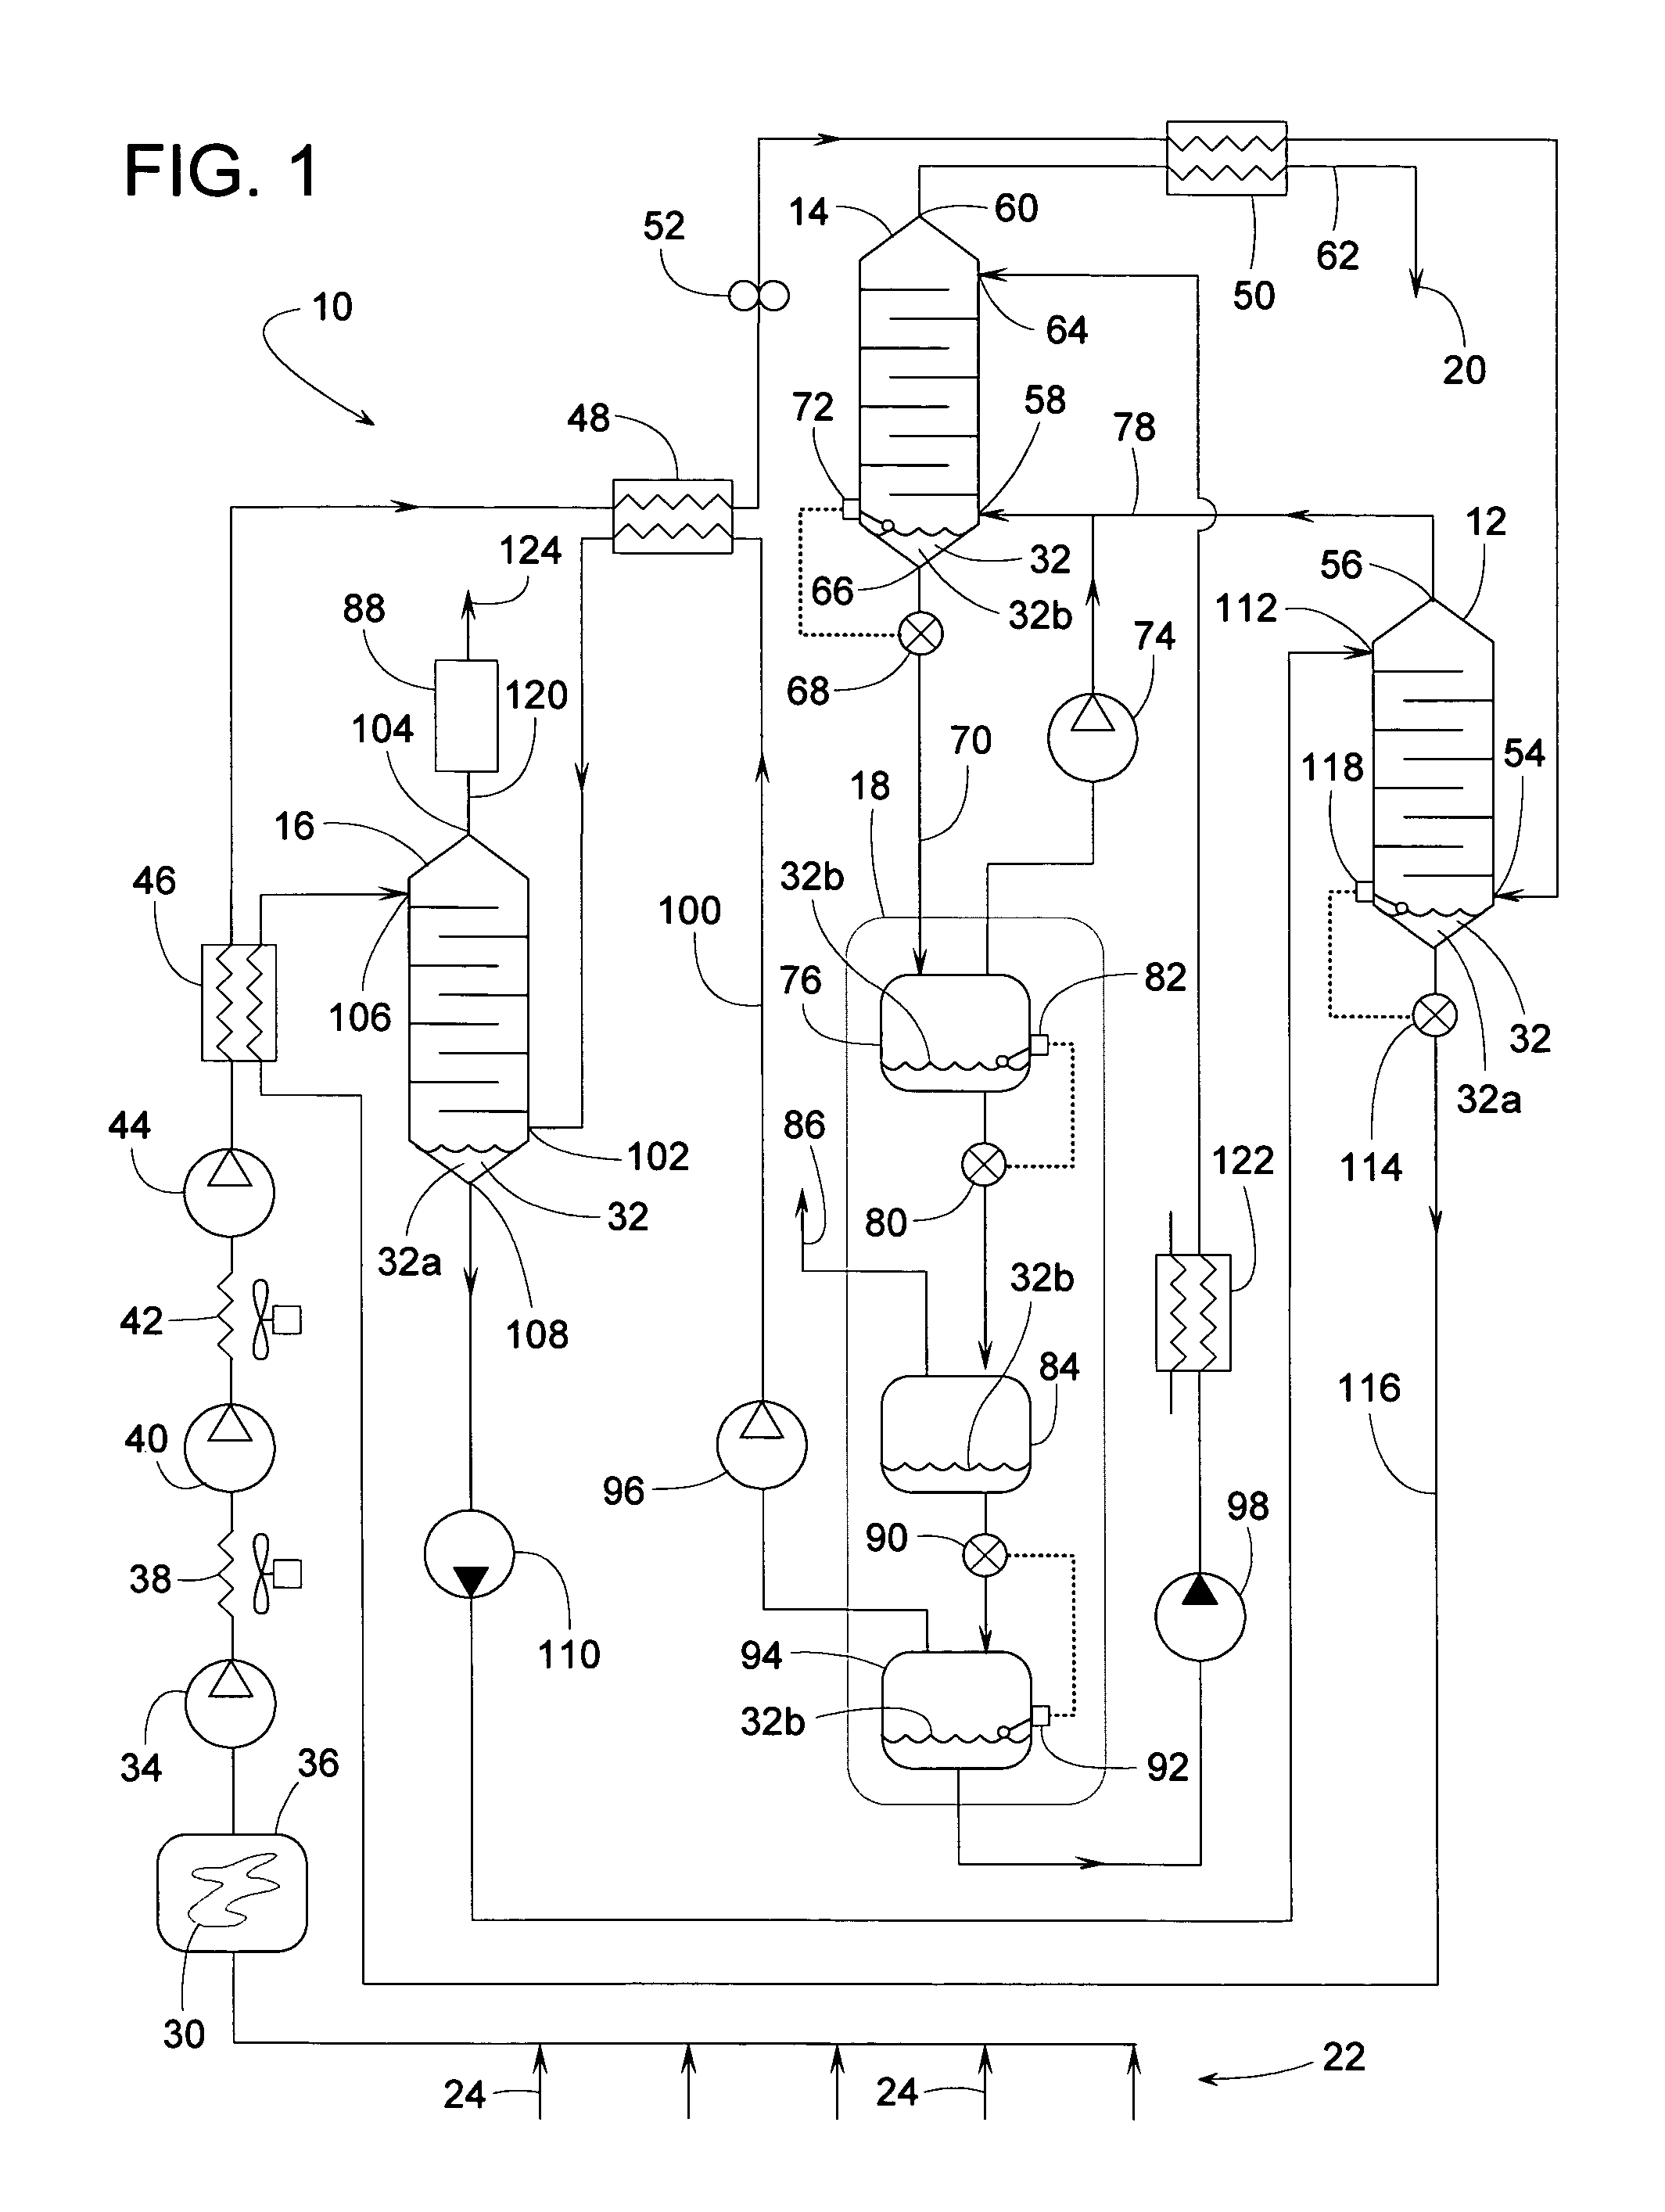 Triple-effect absorption system for recovering methane gas